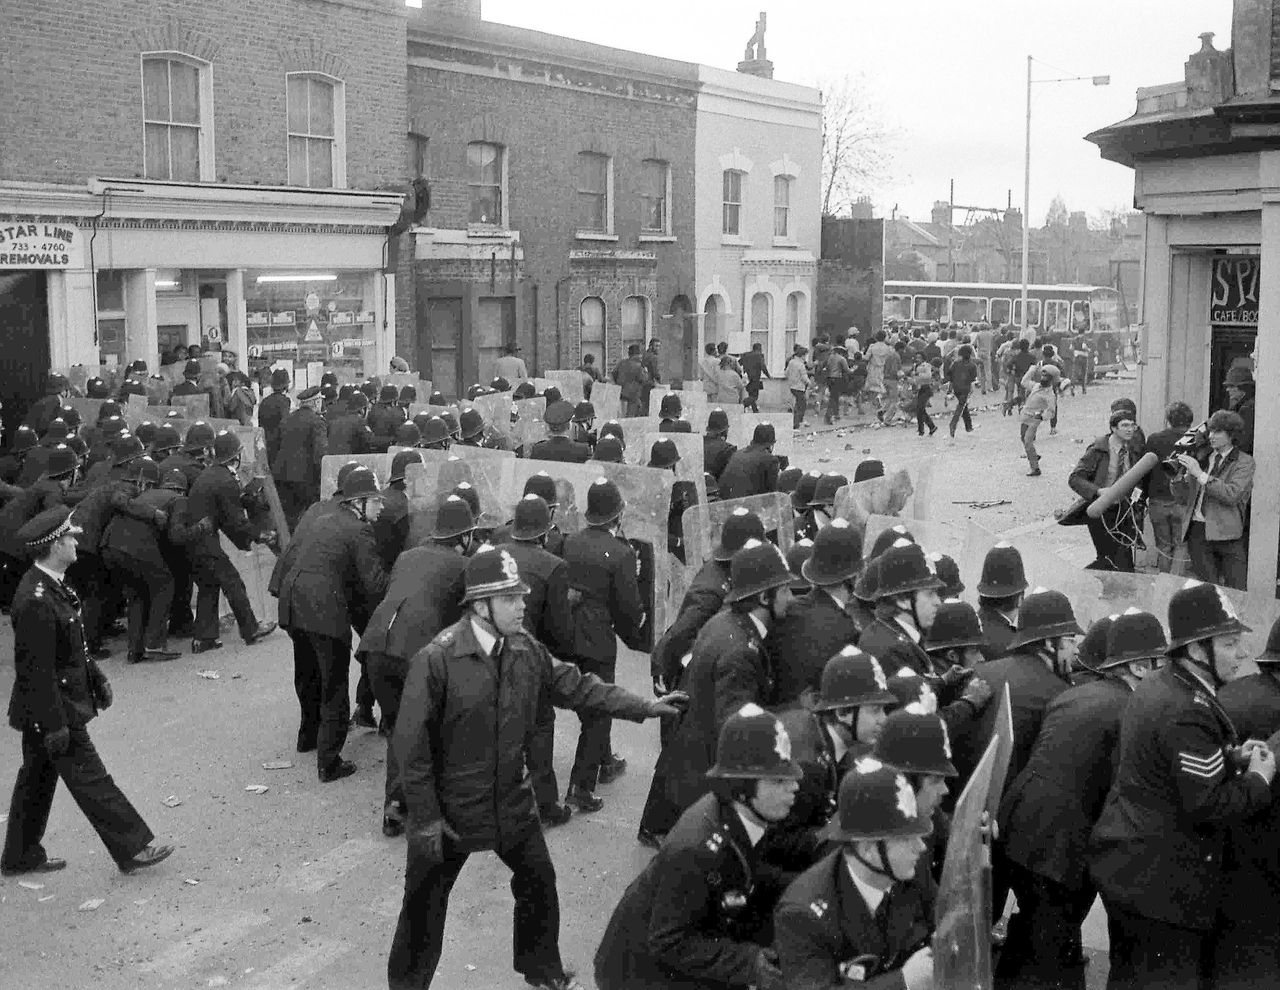 A riot in Brixton on April 12, 1981